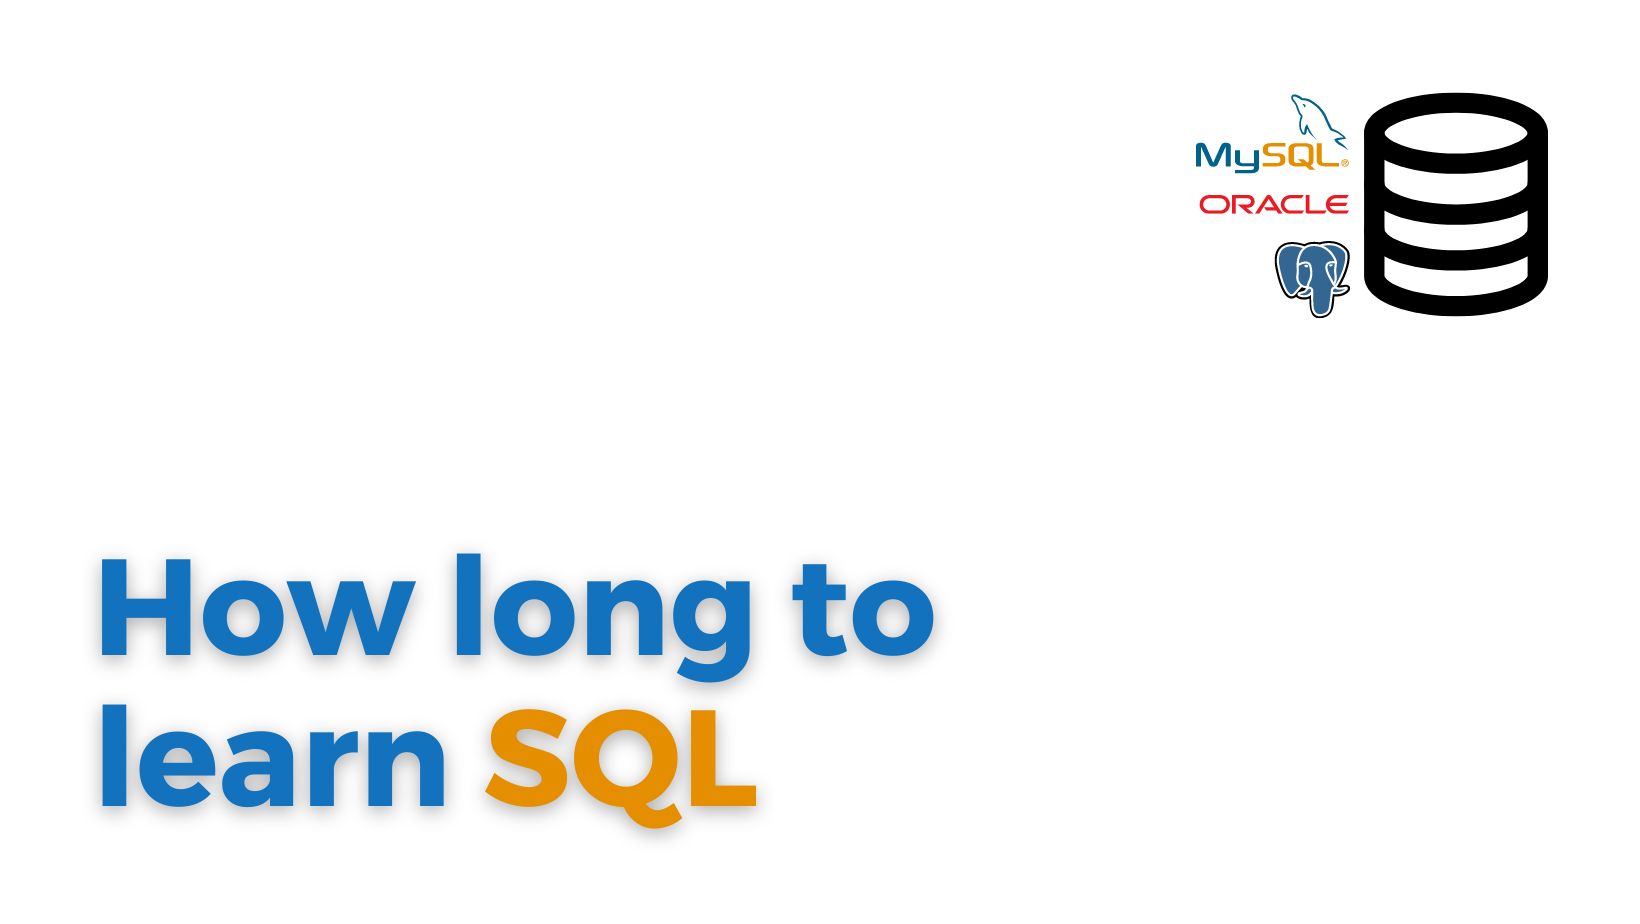 How Long Does It Take to Learn SQL?